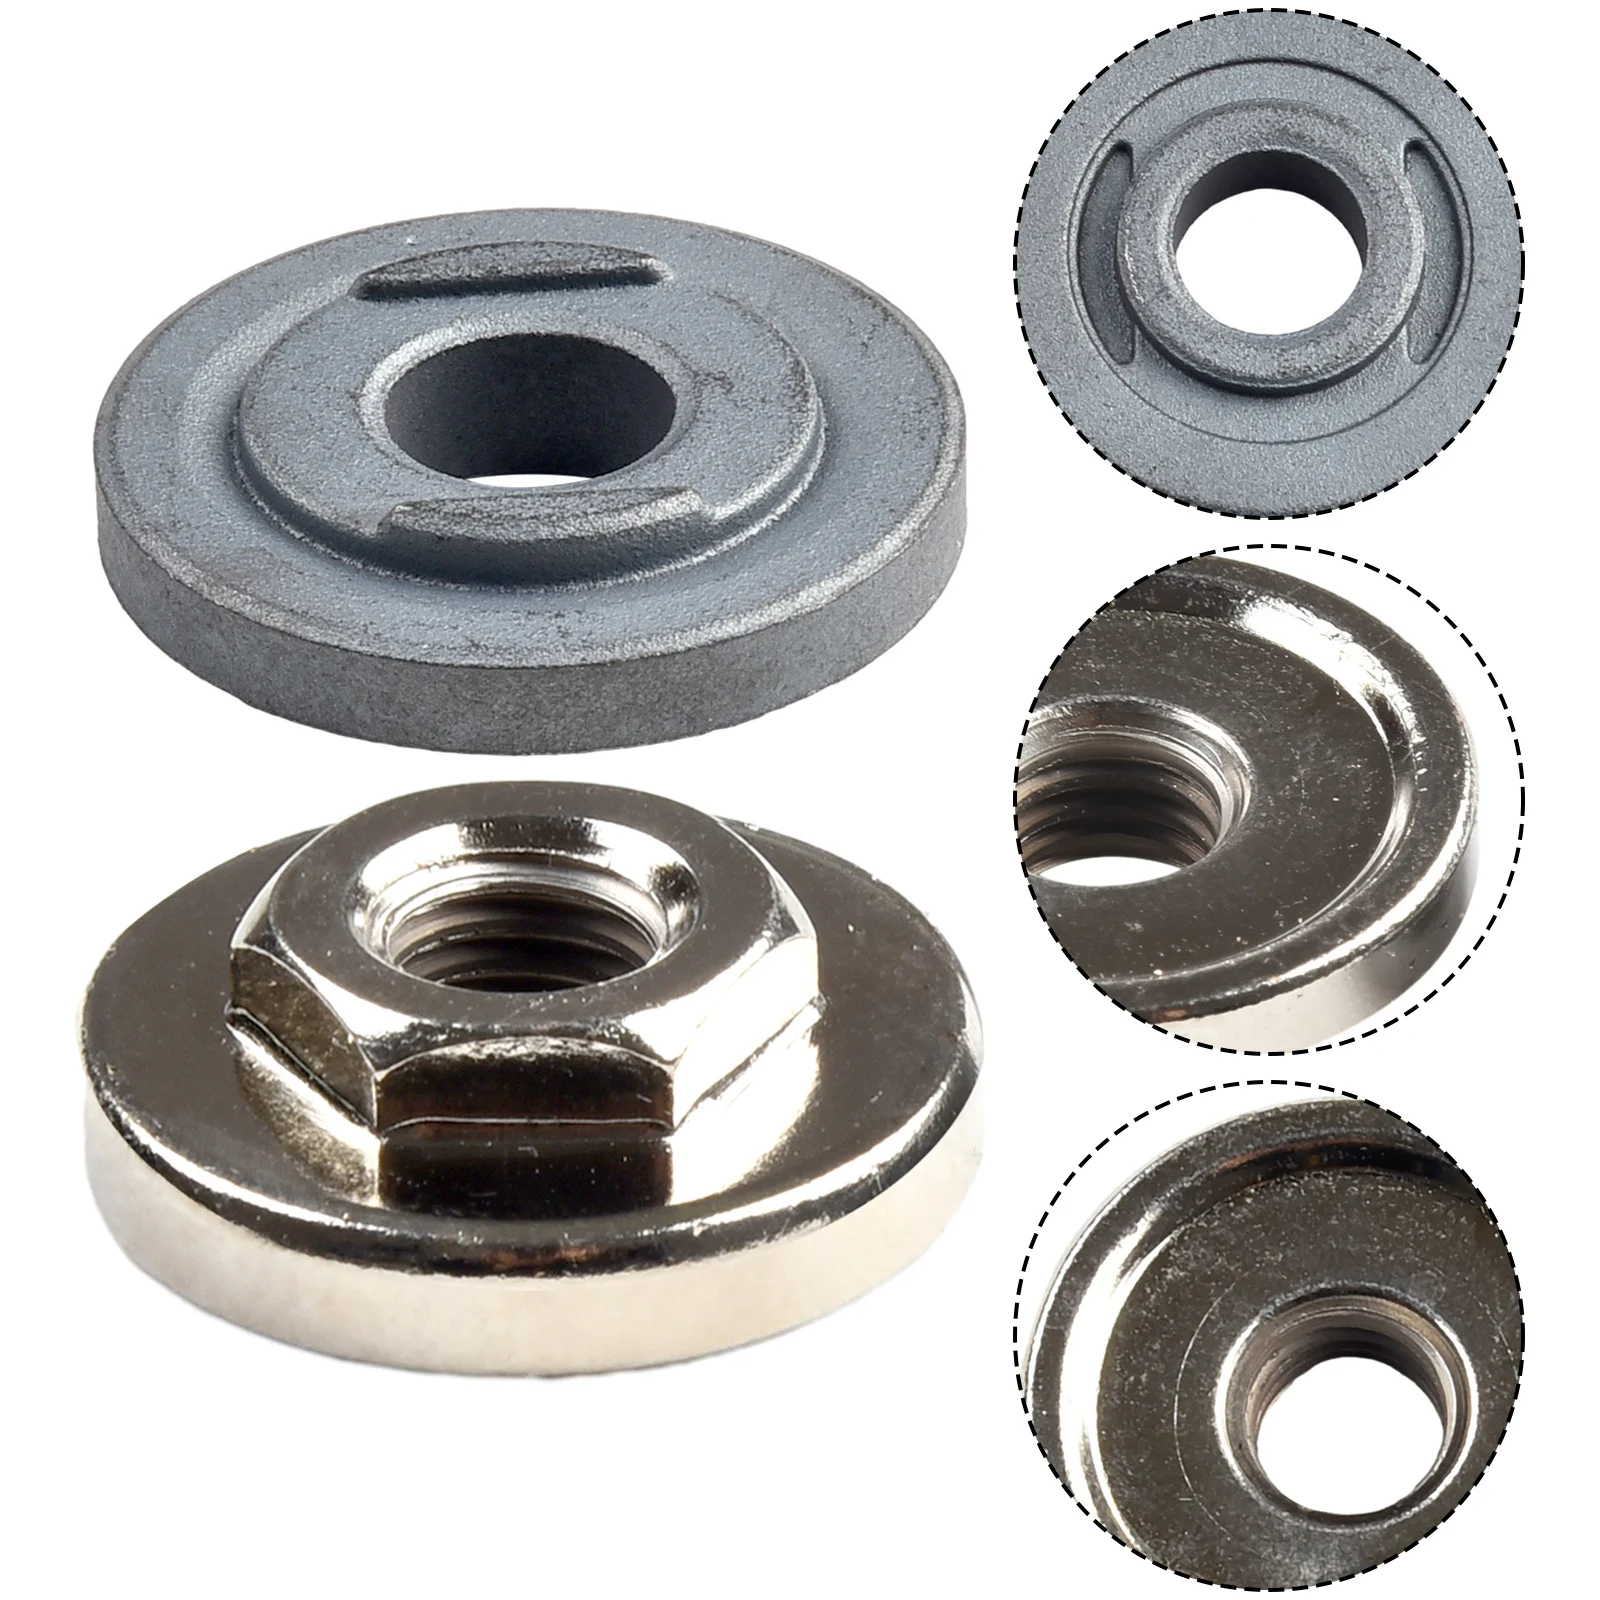 

Upper Pressure Plate Upgrade Your For Angle Grinder with High Quality Hex Nut Set Tools 2/4PCS Enhance Performance